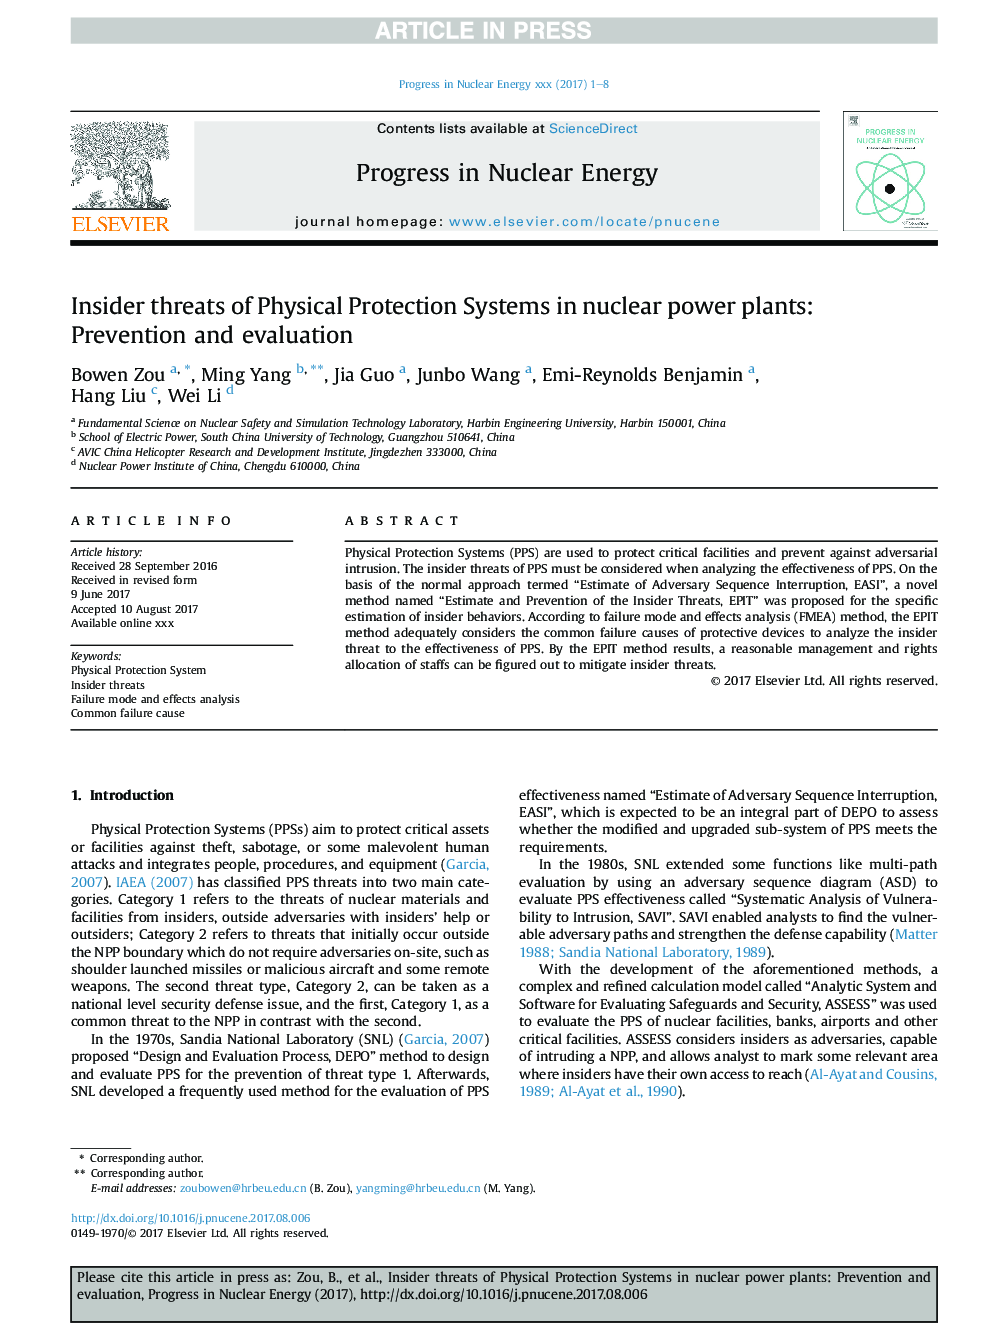 Insider threats of Physical Protection Systems in nuclear power plants: Prevention and evaluation